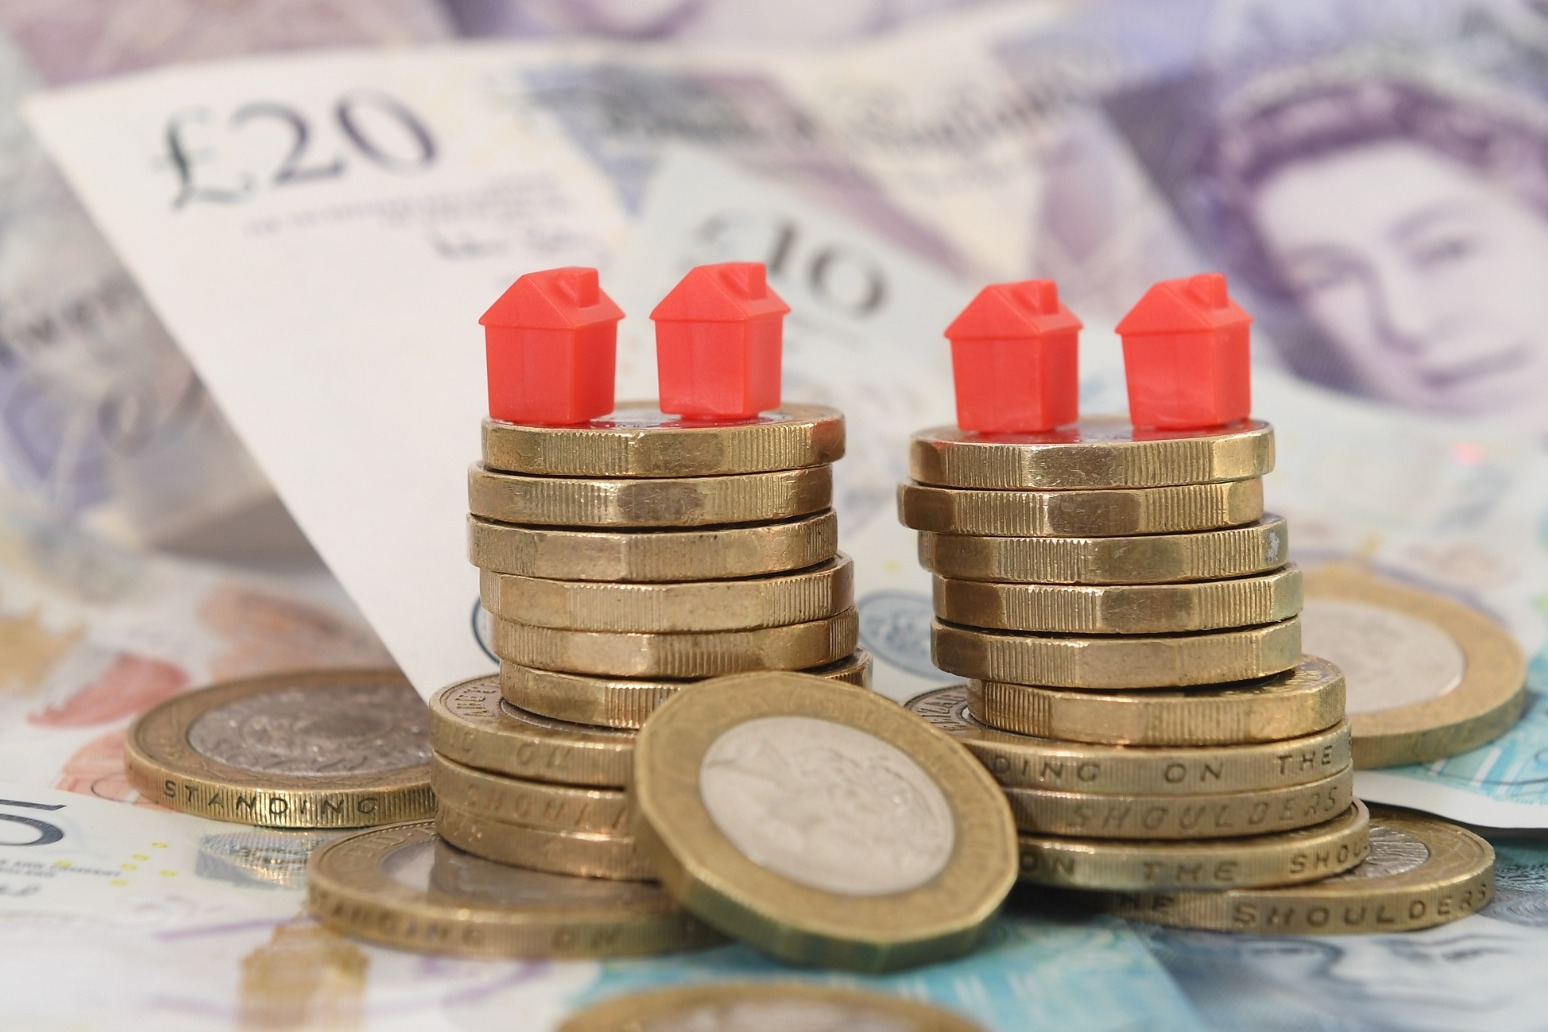 356,000 extra mortgage borrowers could face payment difficulties by mid-2024 